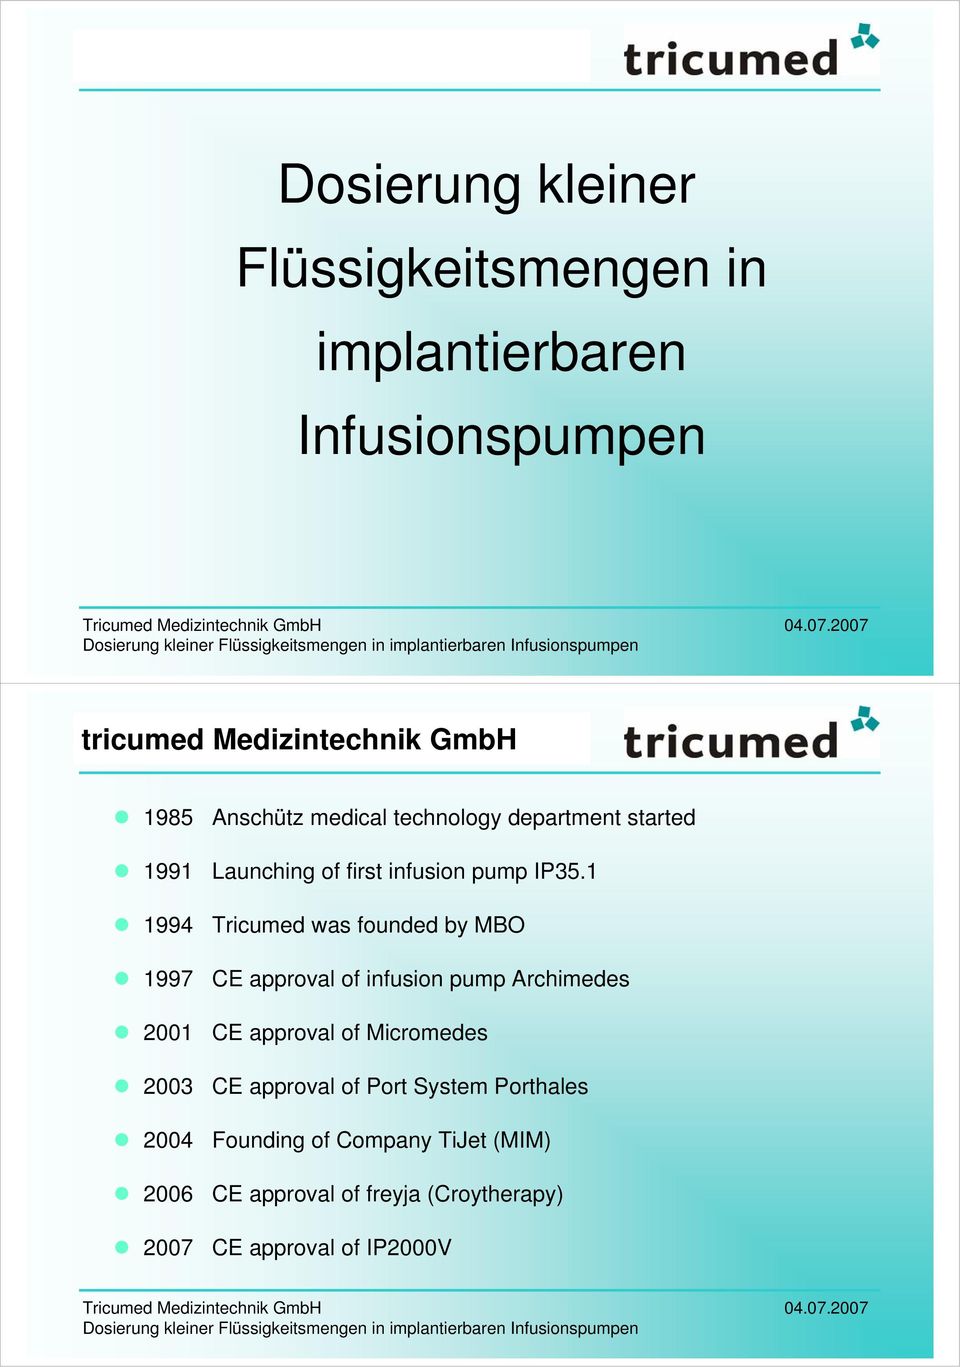 1 1994 Tricumed was founded by MBO 1997 CE approval of infusion pump Archimedes 2001 CE approval of Micromedes